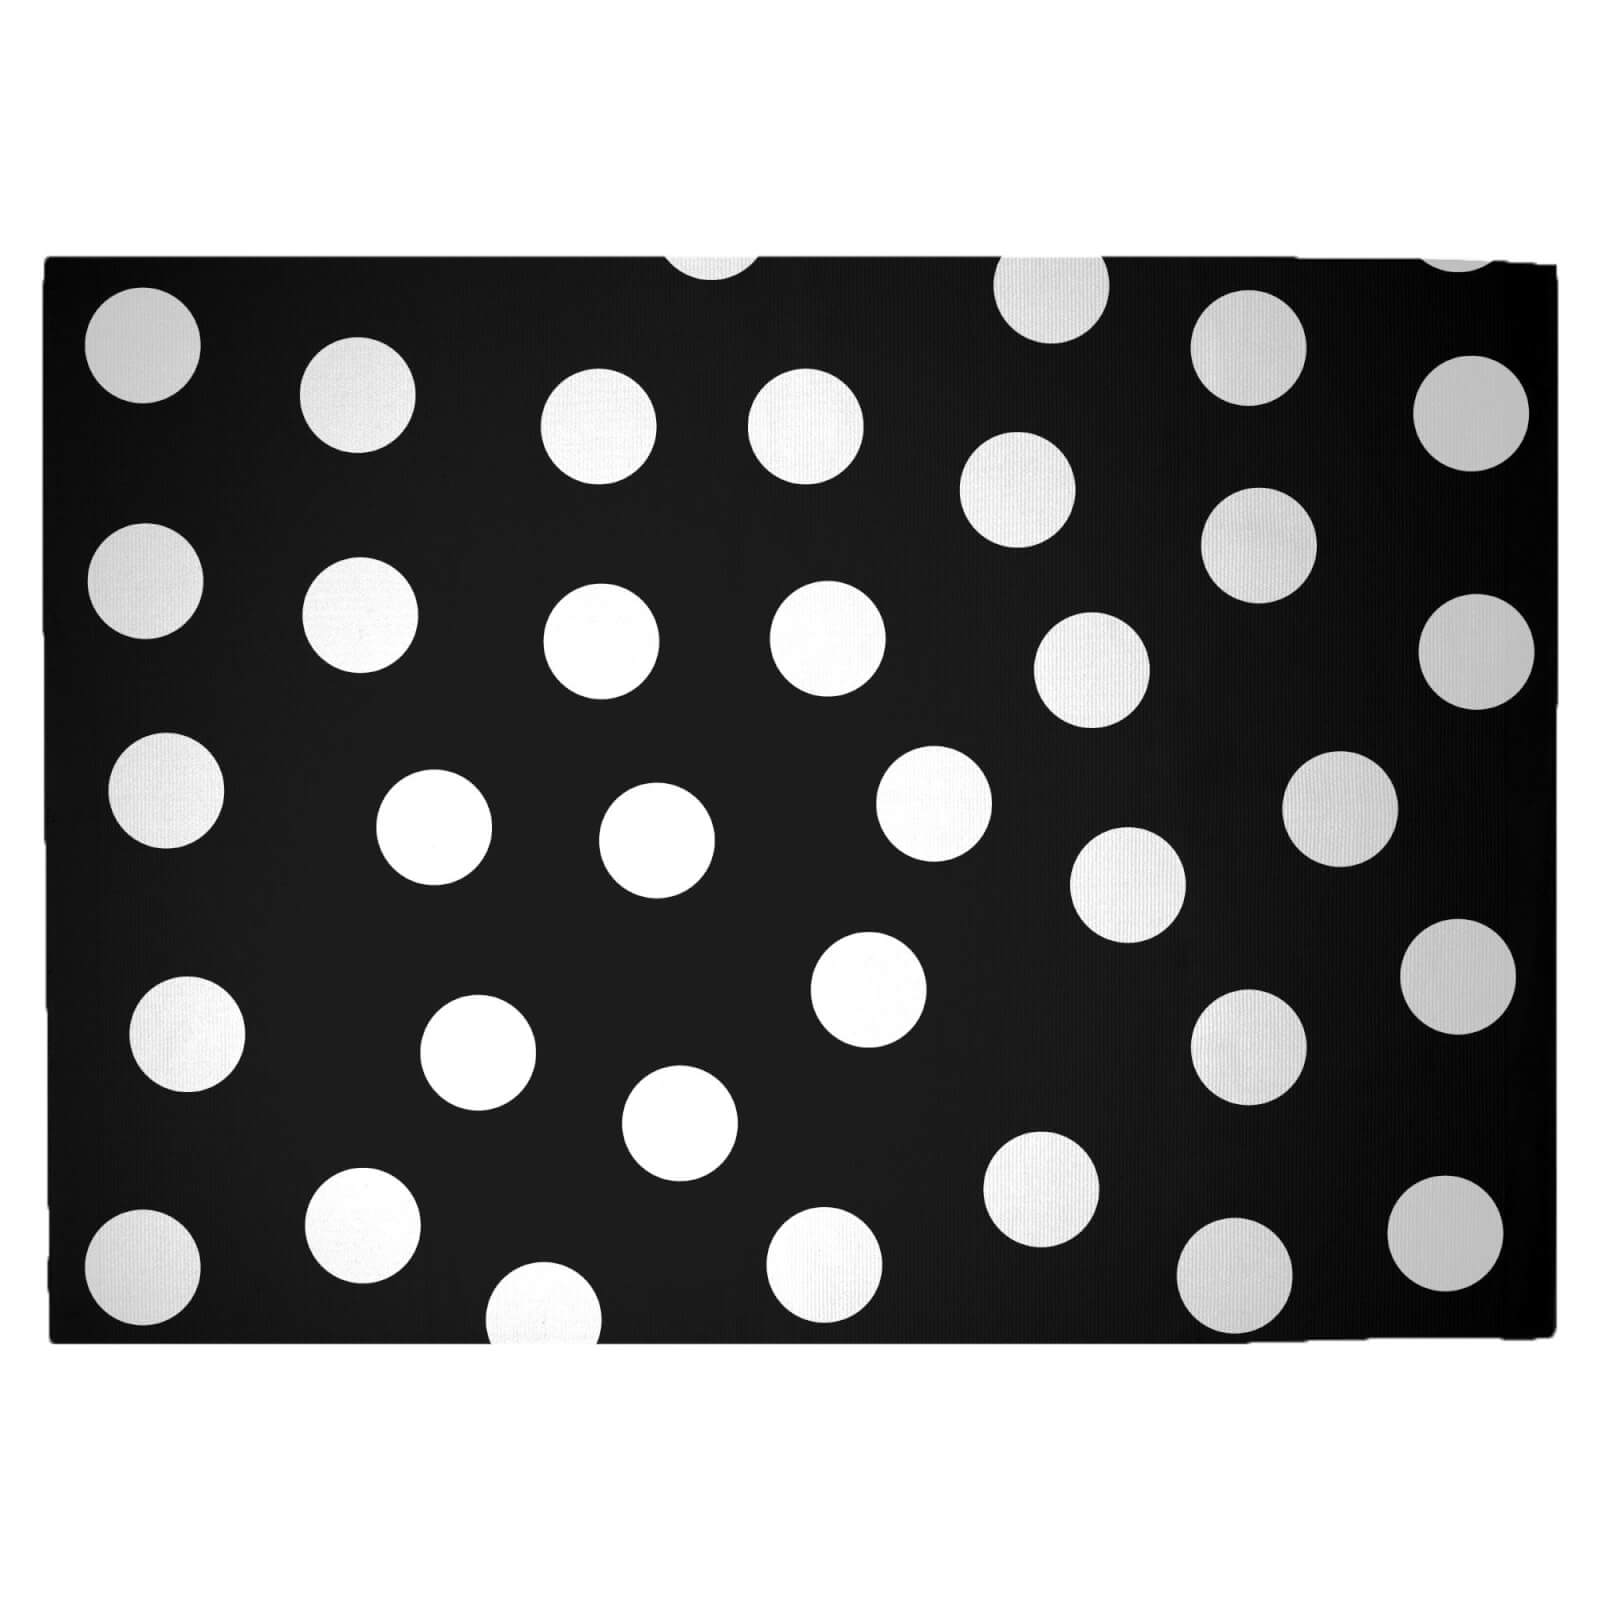 Inverted Polka Dots Woven Rug - Large